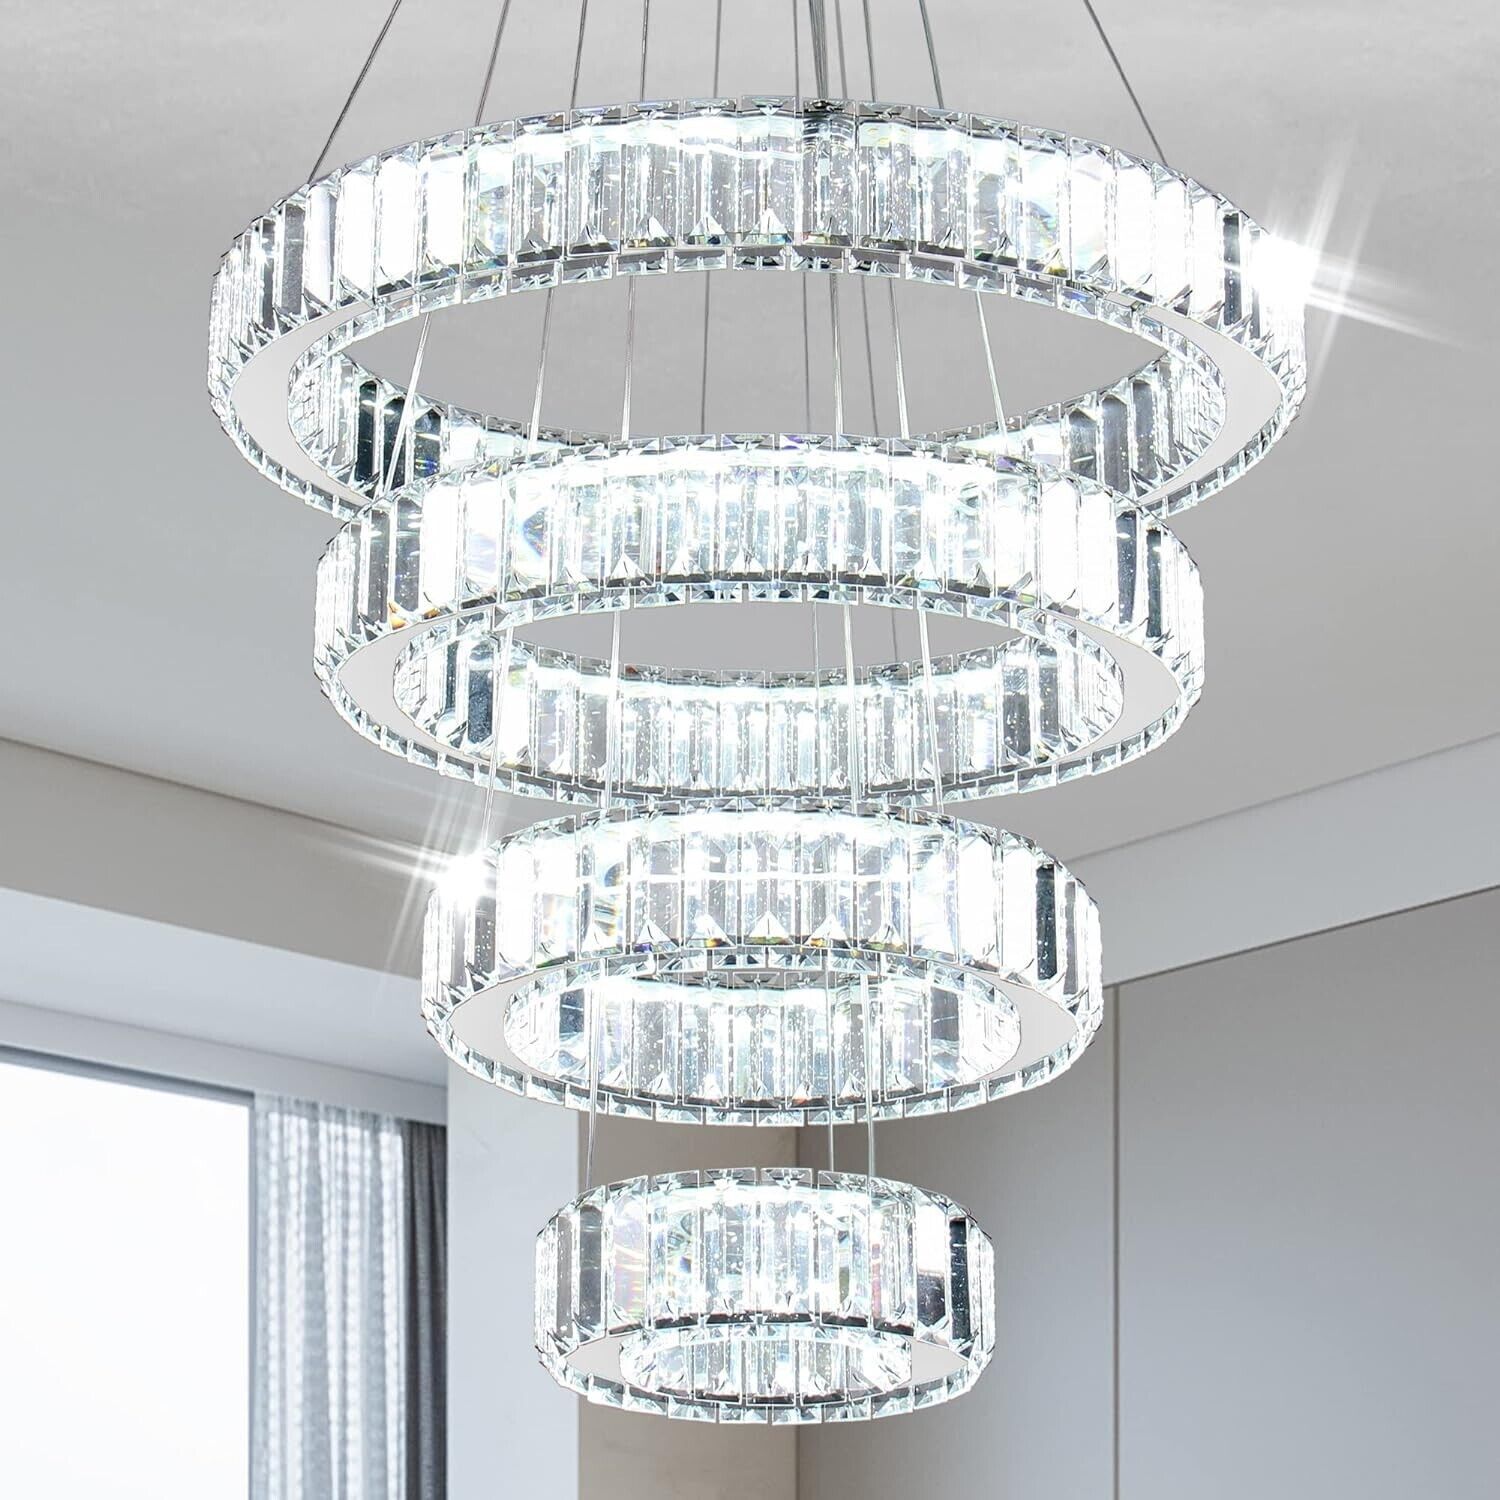 Contemporary LED Pendant Light with Crystal Rings, Ideal for Dining Room,